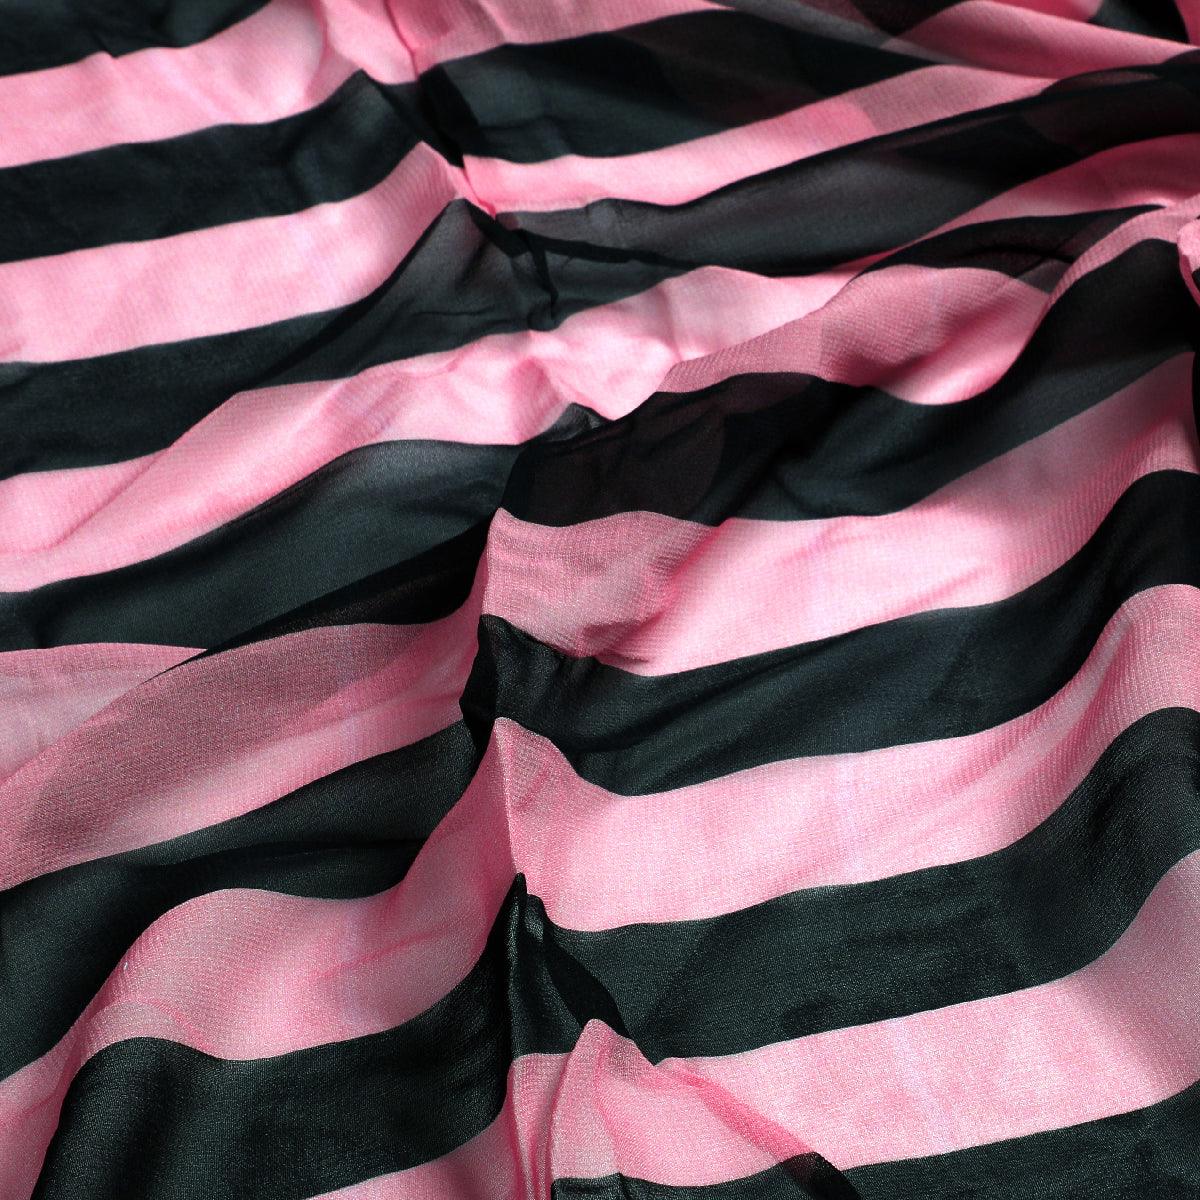 Bayadere Stripes Black With Pink Digital Printed Fabric - Pure Georgette - FAB VOGUE Studio®